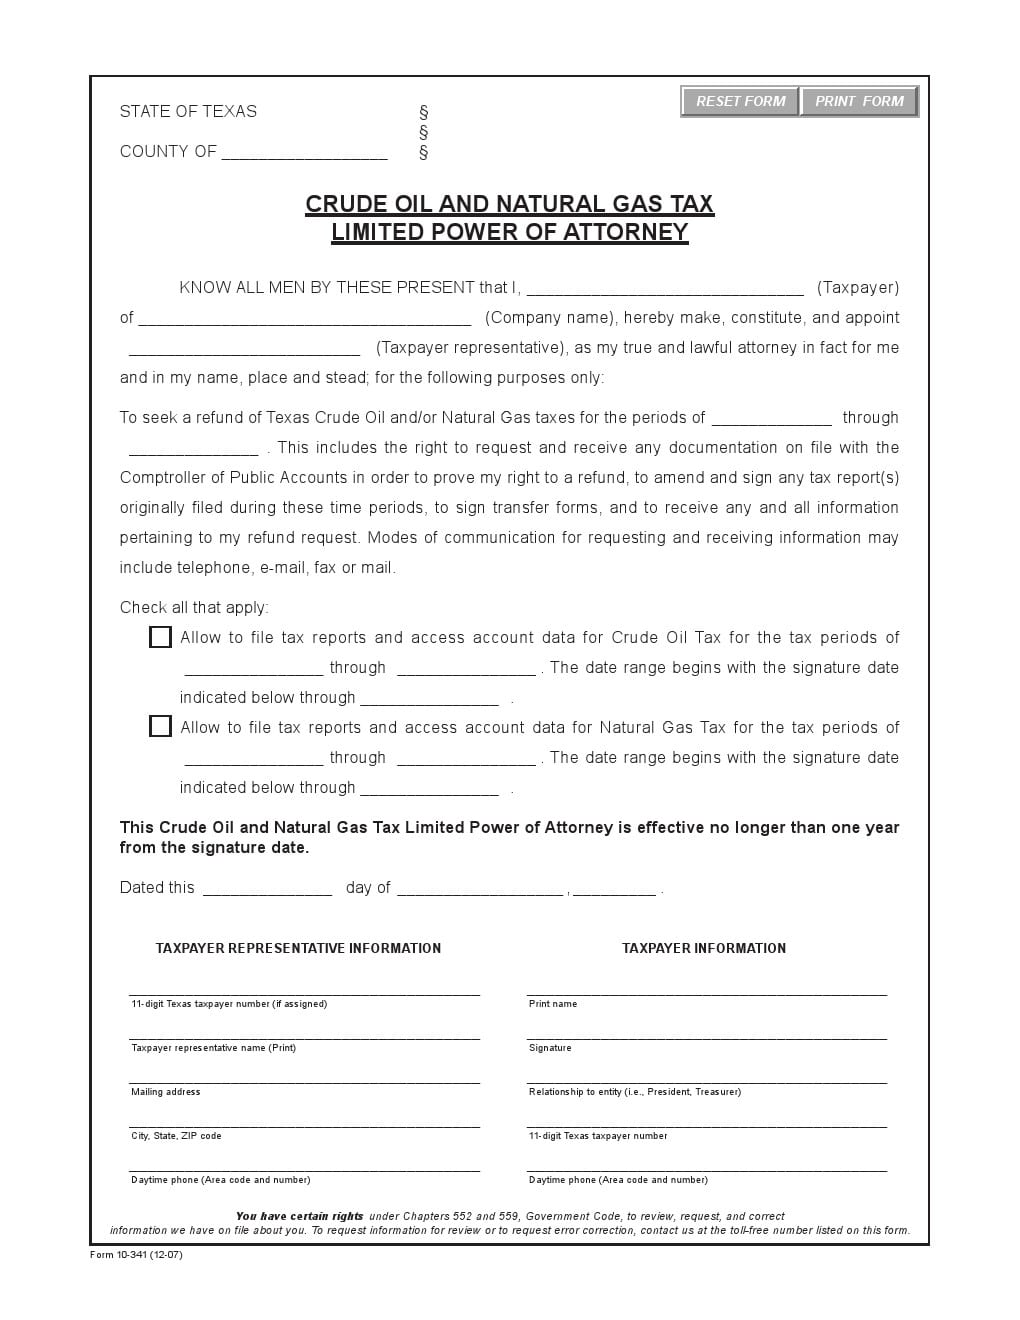 Texas Crude Oil Limited Power of Attorney Form